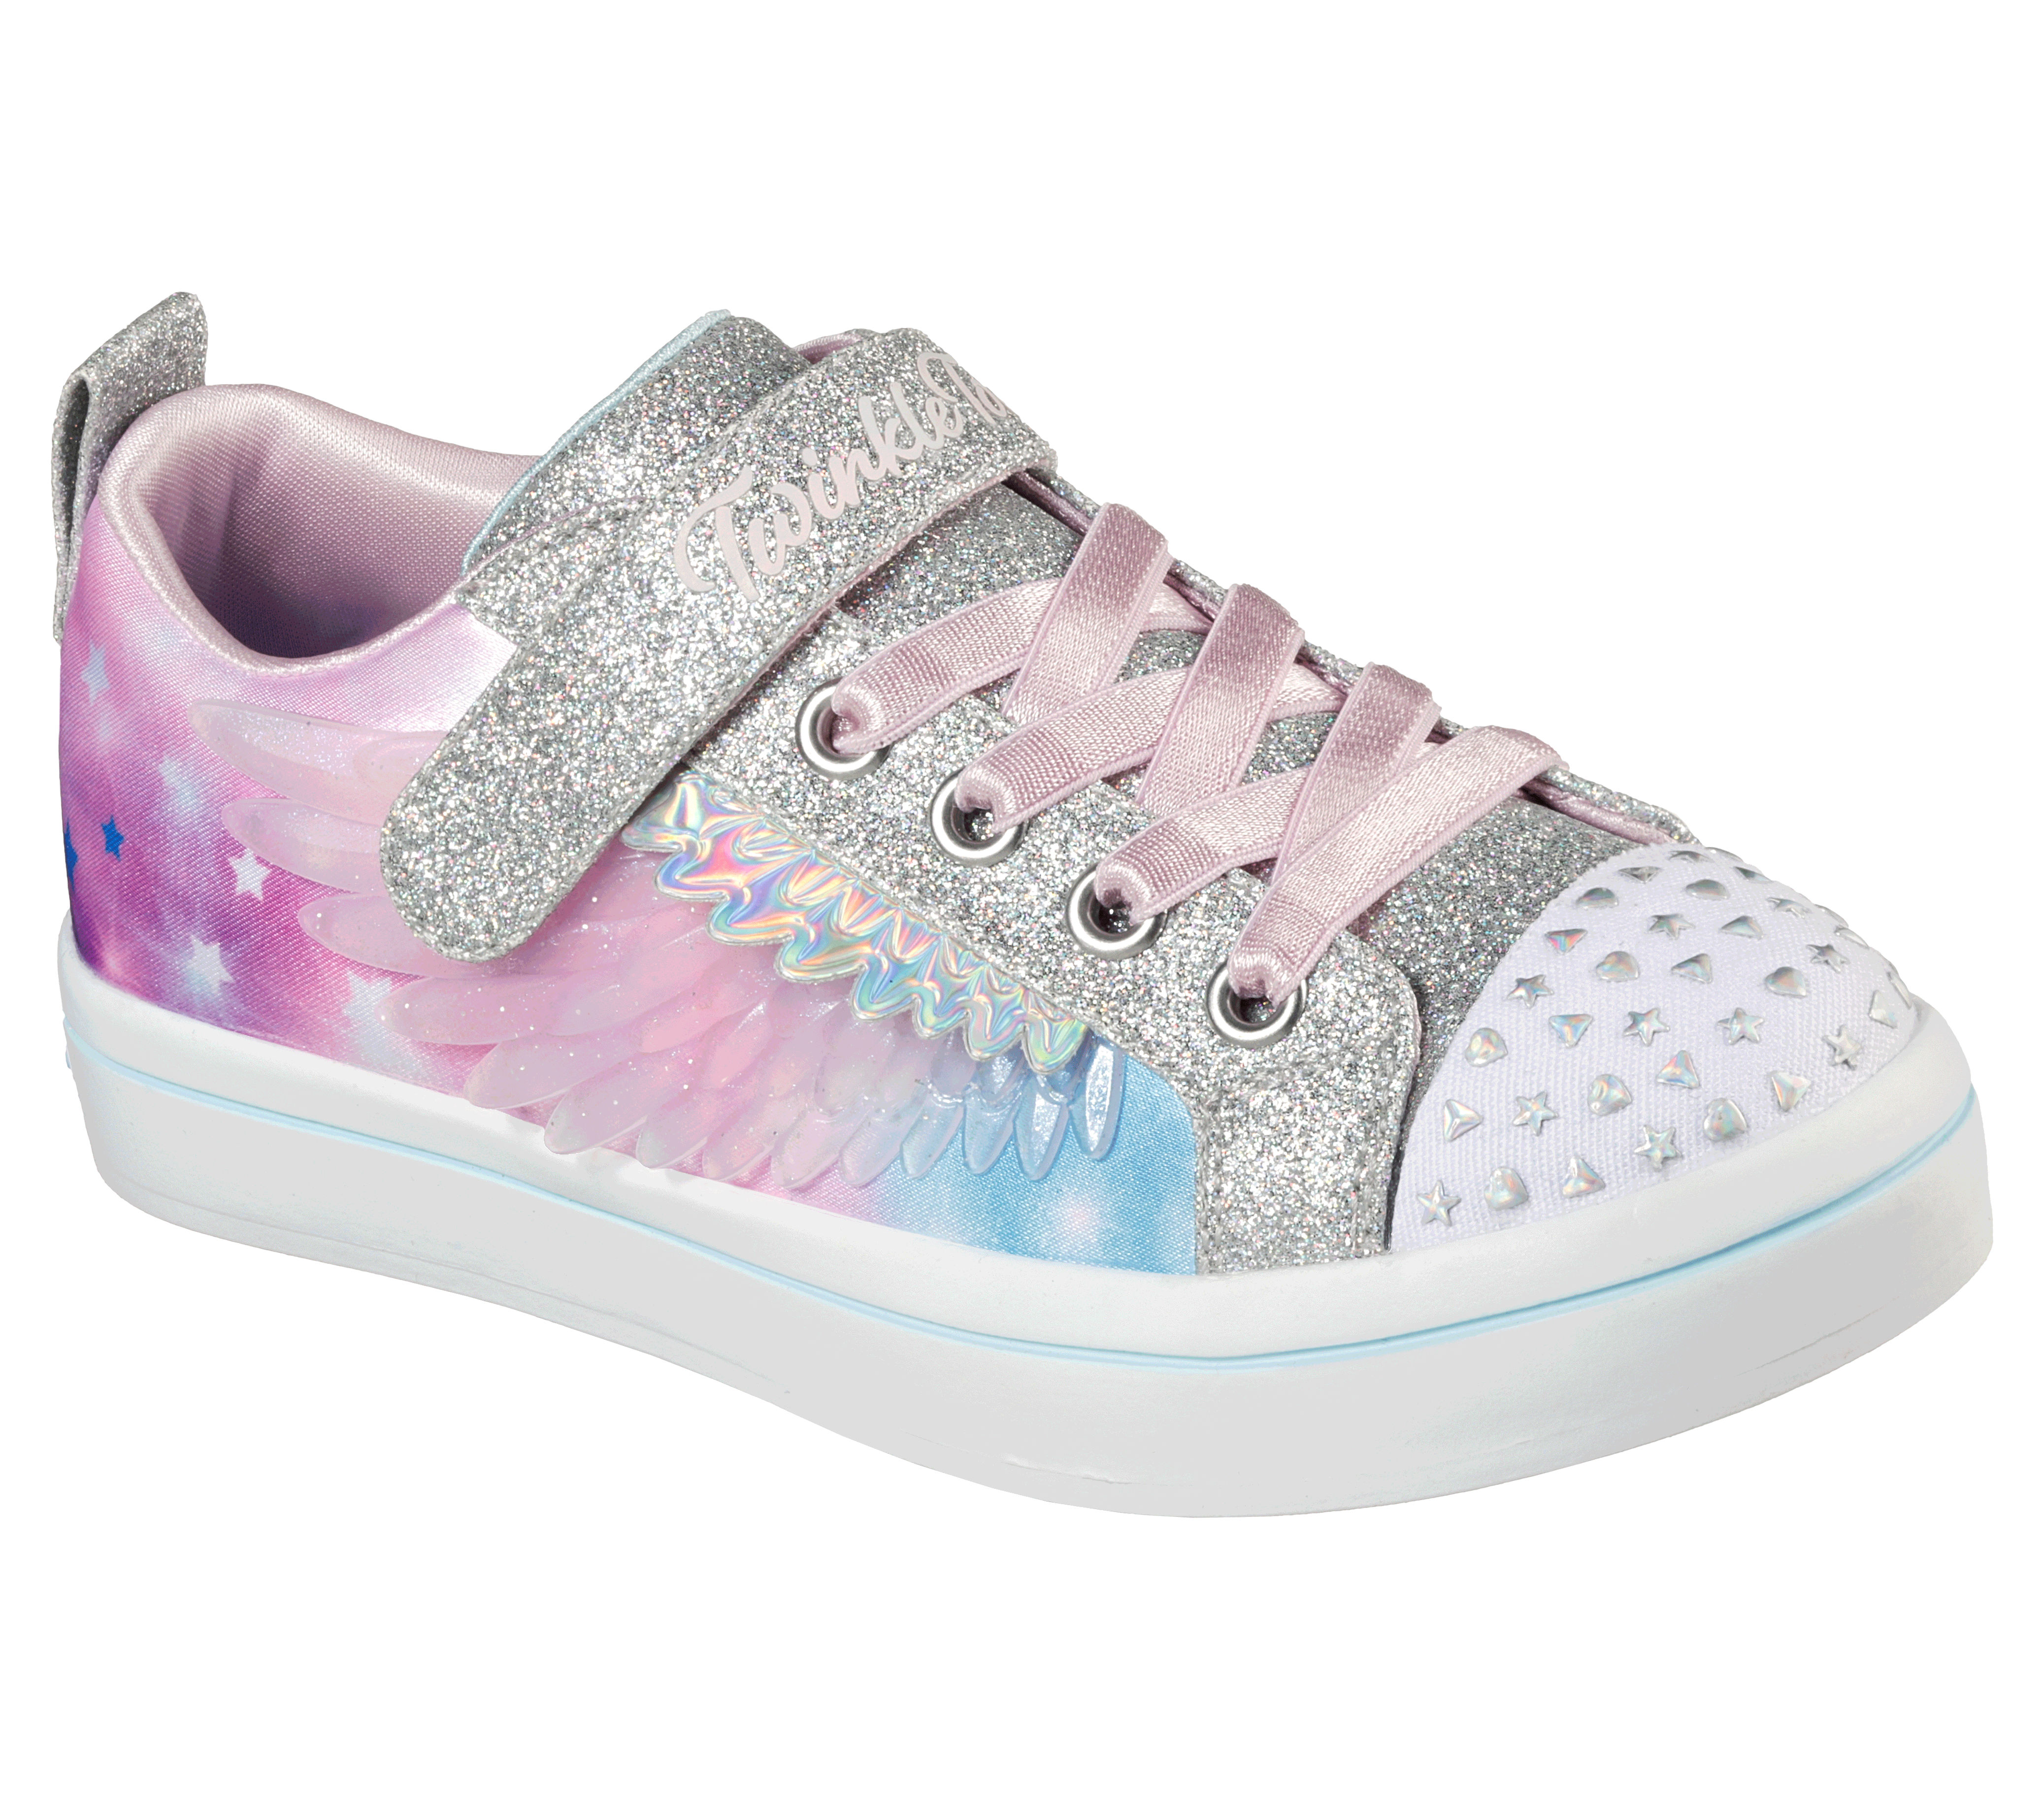 skechers twinkle toes toddler size 4